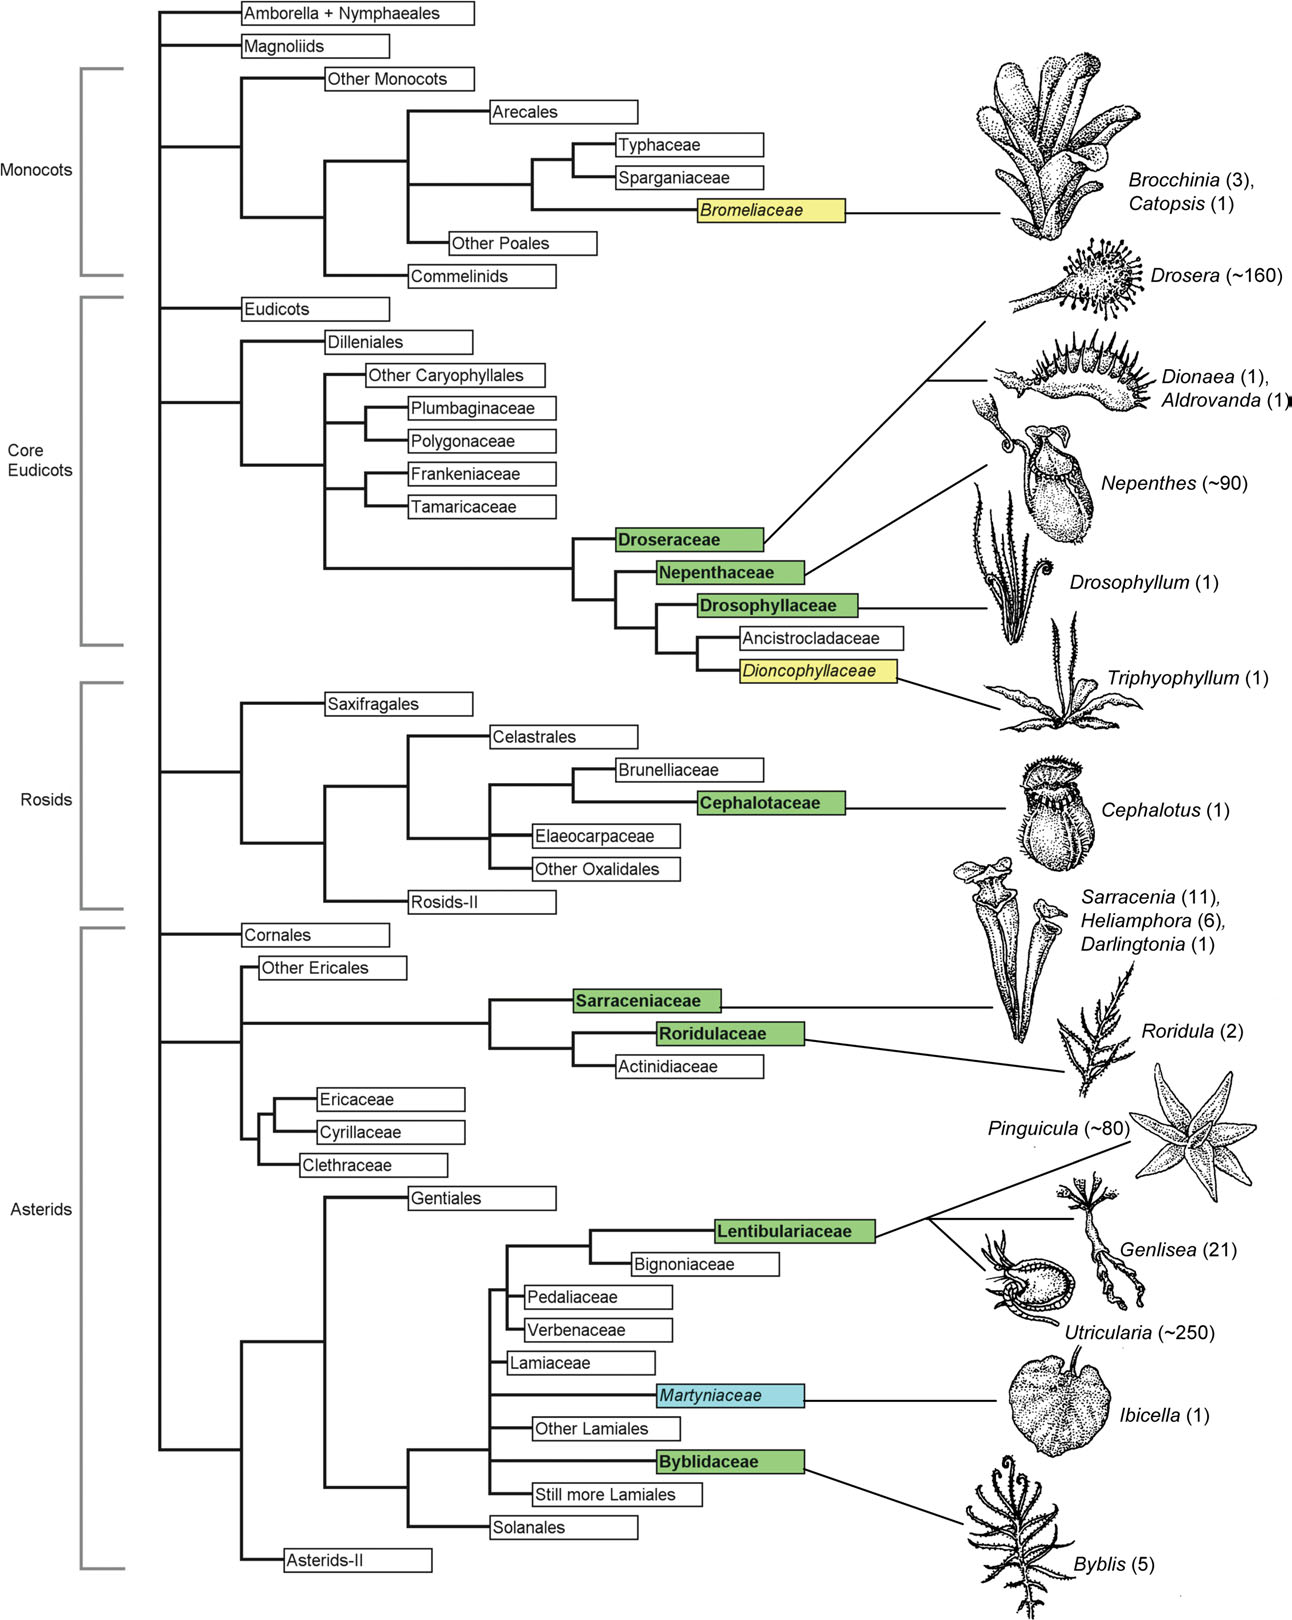 Positions of carnivorous plant families